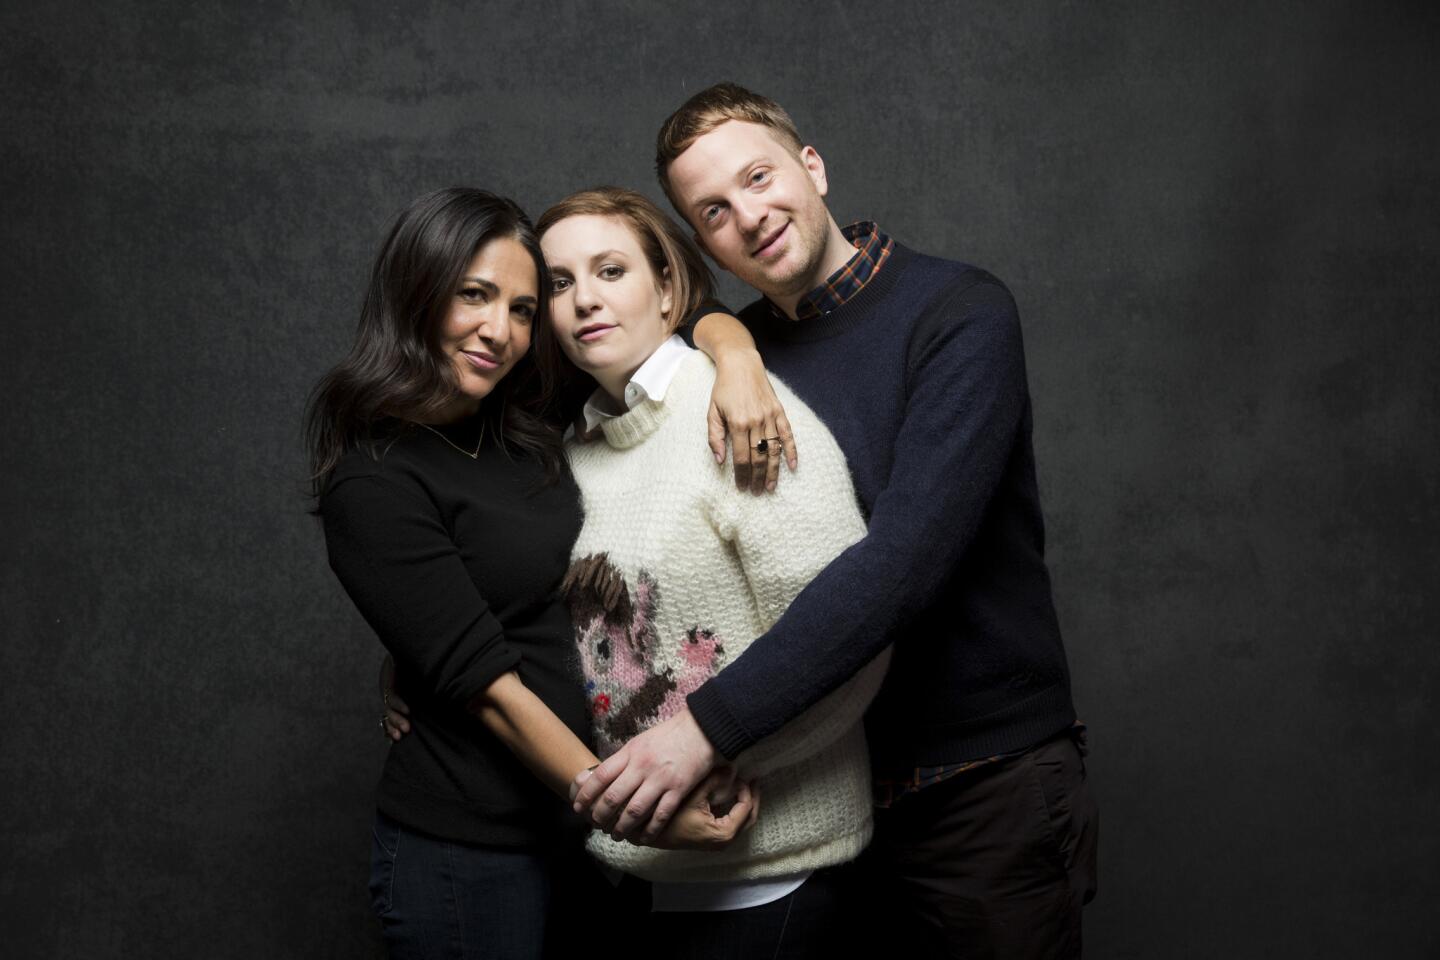 The team behind the documentary "It's Me, Hilary," about "Eloise" illustrator Hilary Knight. From left, producer Jenni Konner, producer Lena Dunham and director Matt Wolf.